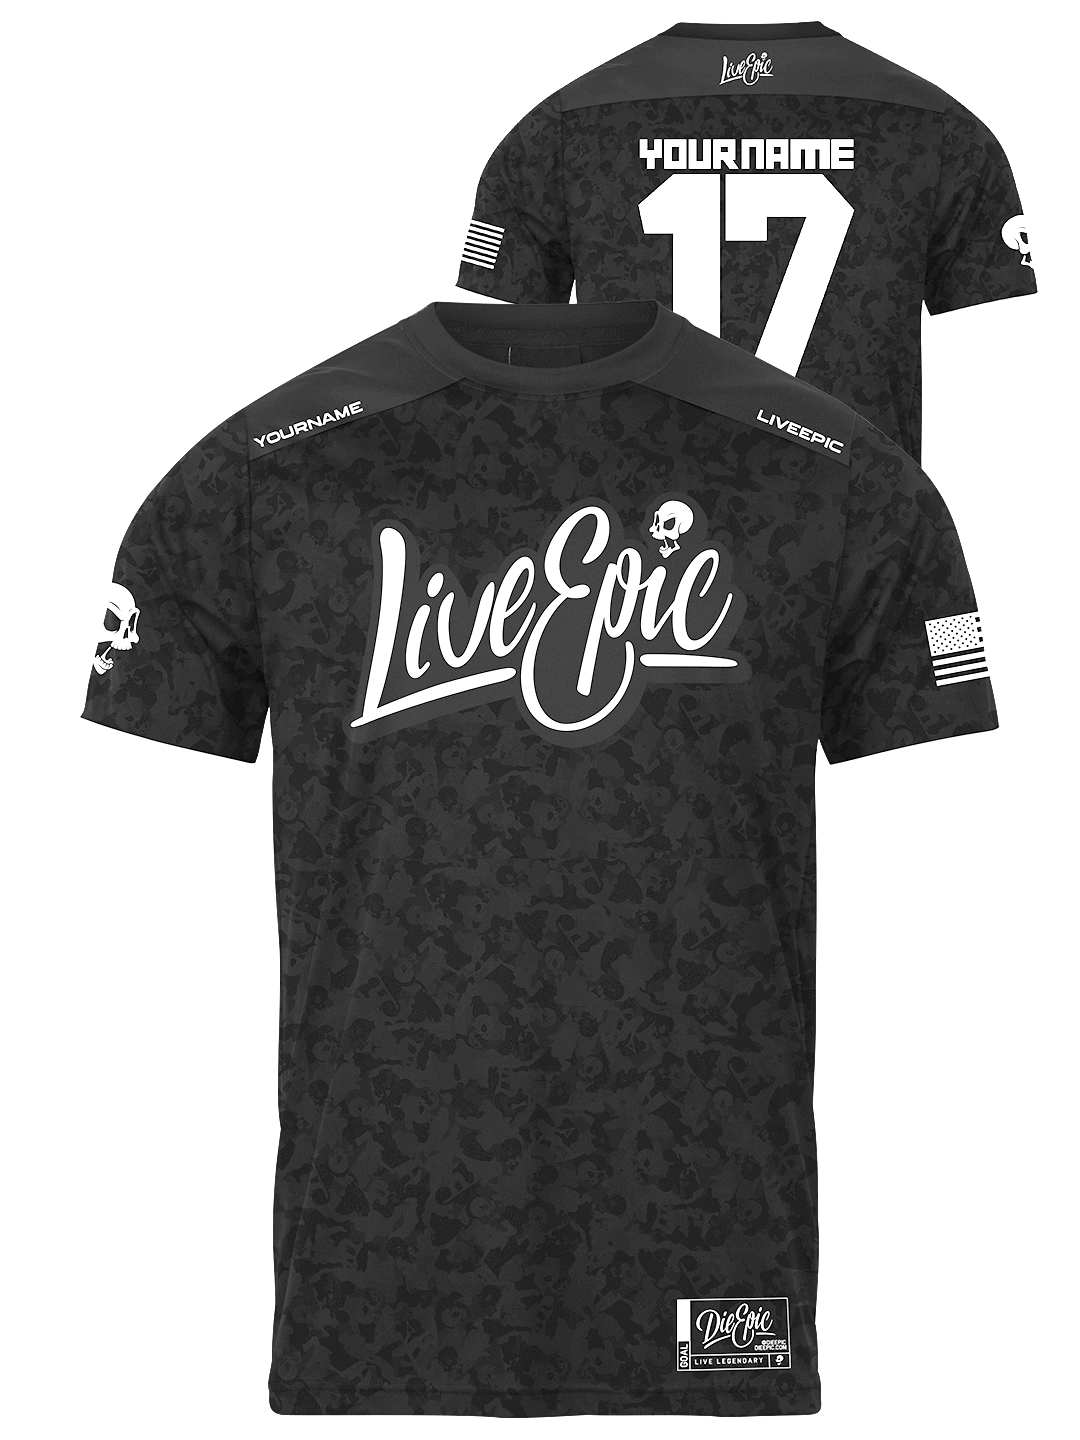 Discounted Pre-Sales] Die Epic Skull Lover Jersey - Die Epic® Live  Legendary Epic Clothing